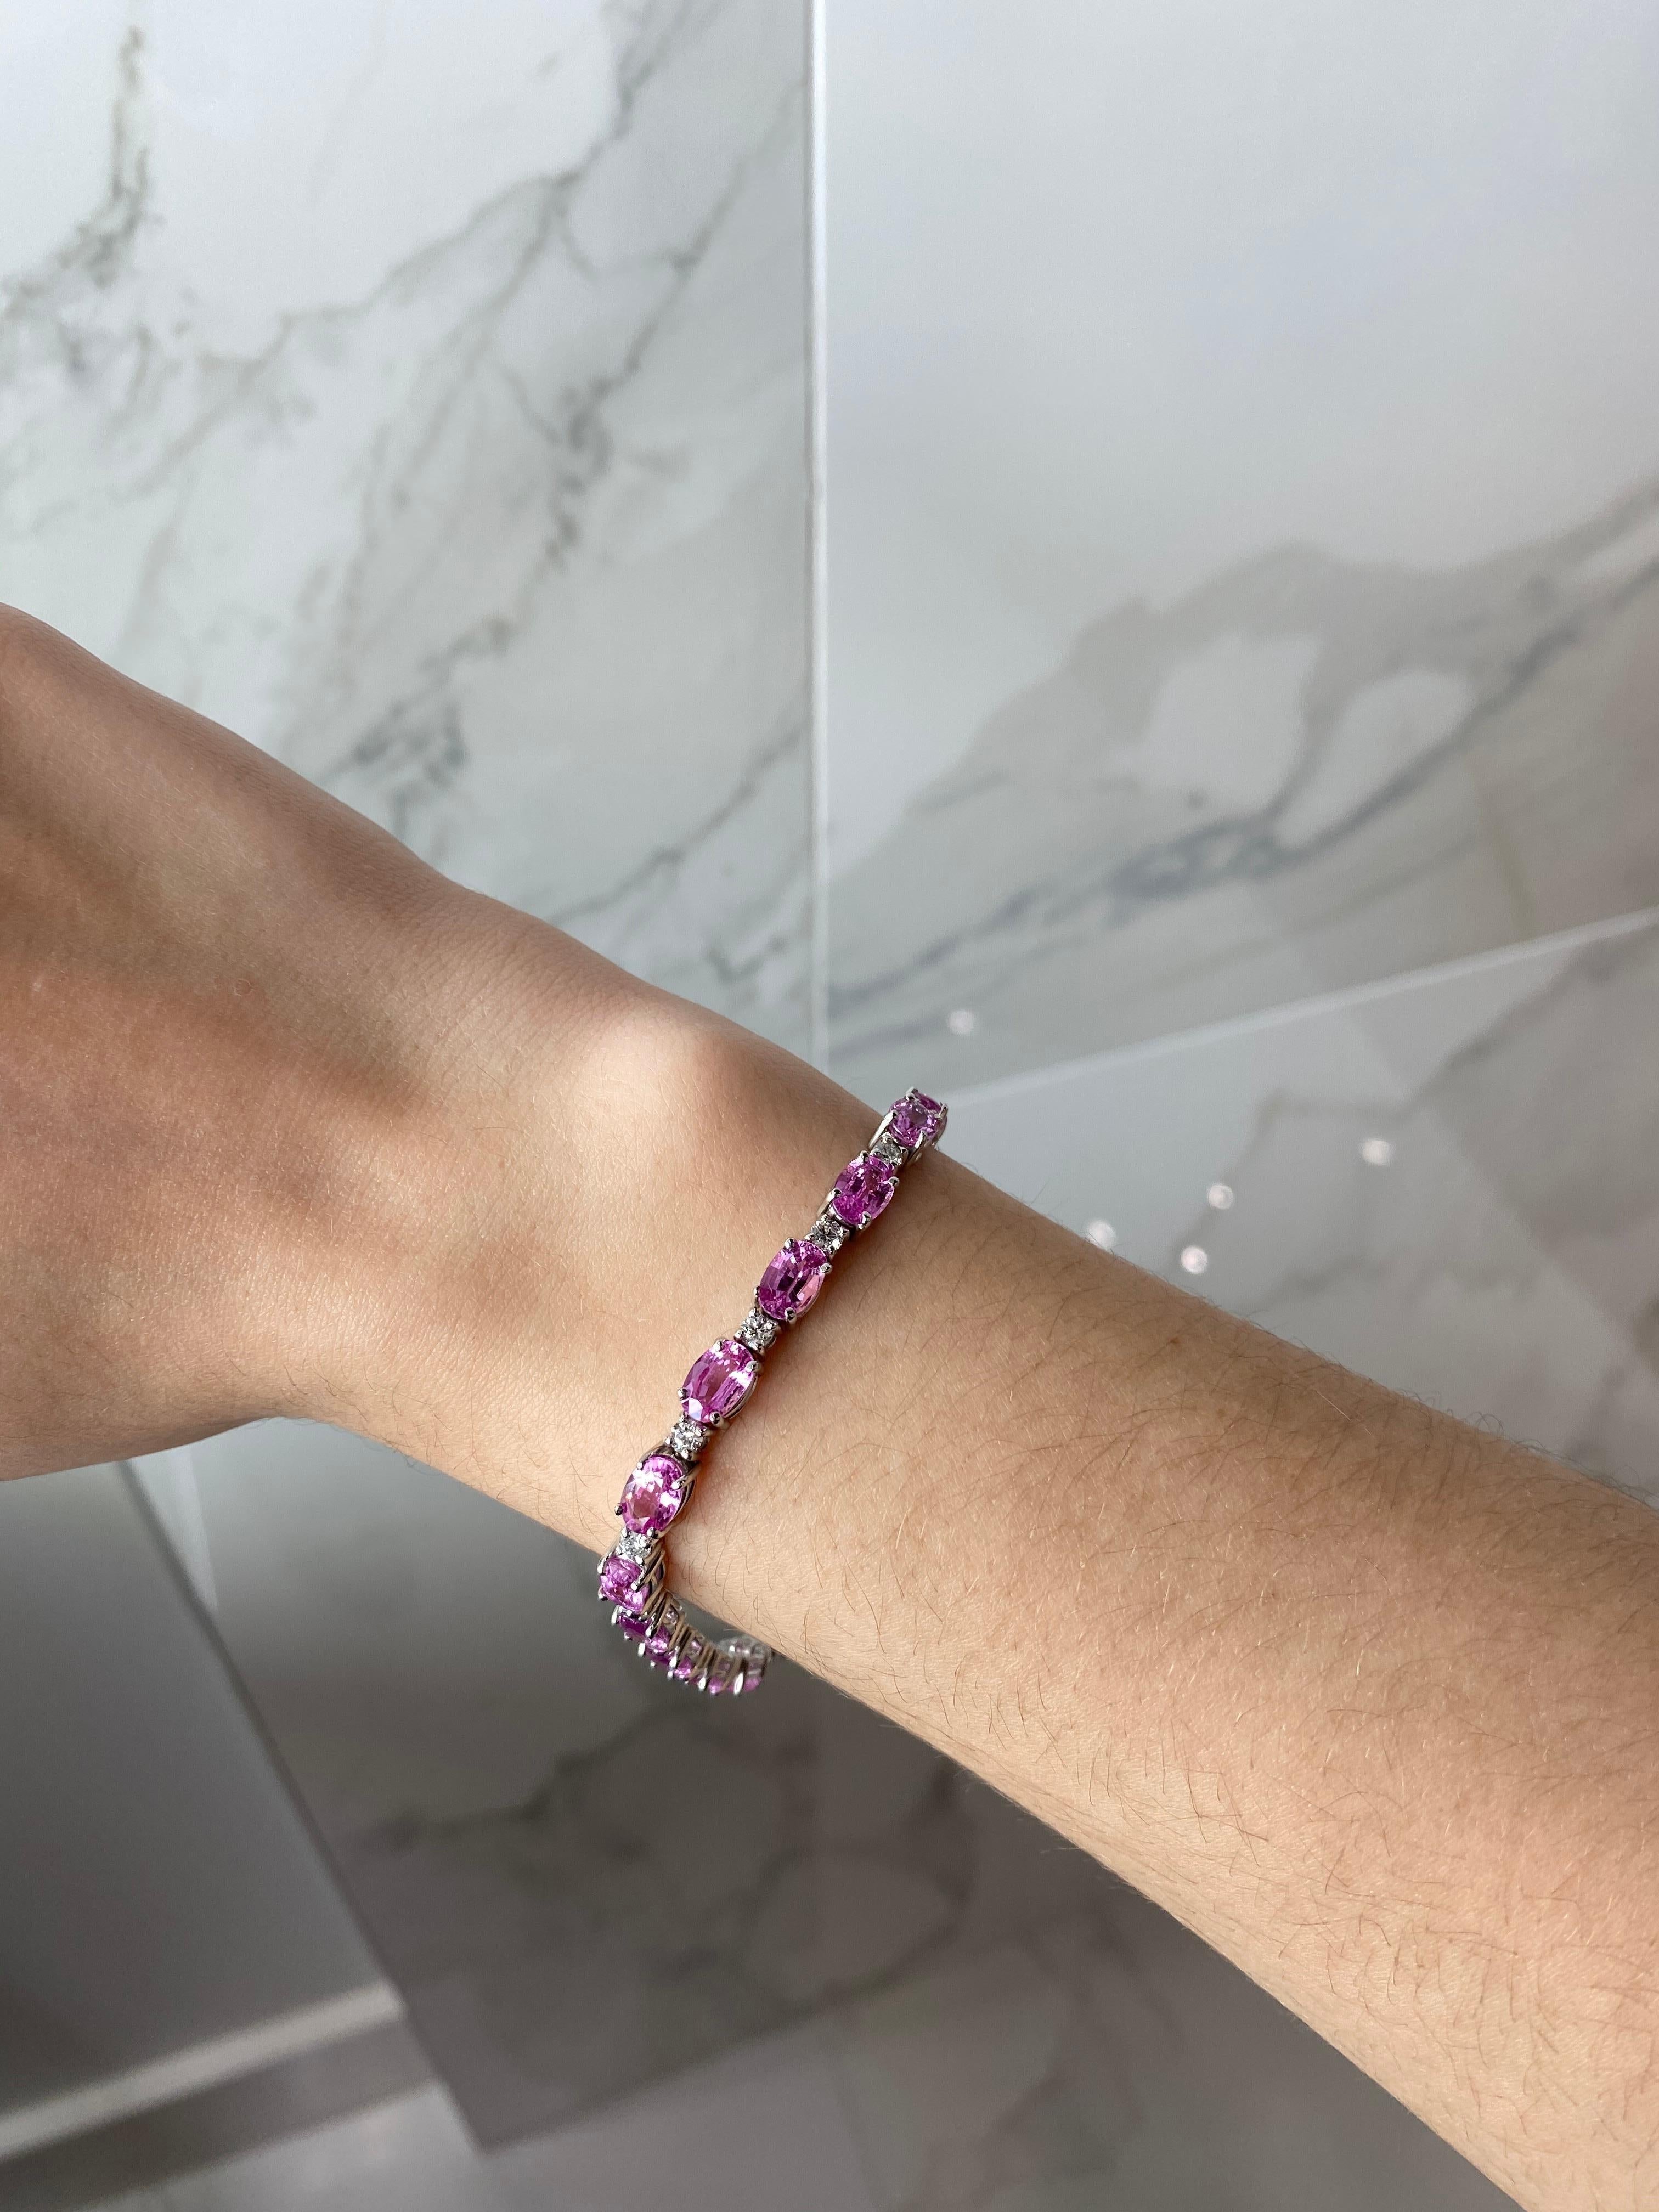 This bracelet adds some color and pop to the standard layerable tennis bracelets. With 16.48ct total weight in oval shape pink natural sapphires and 1.72ct total weight in round diamonds in between, you cannot go wrong with this sleek but fun